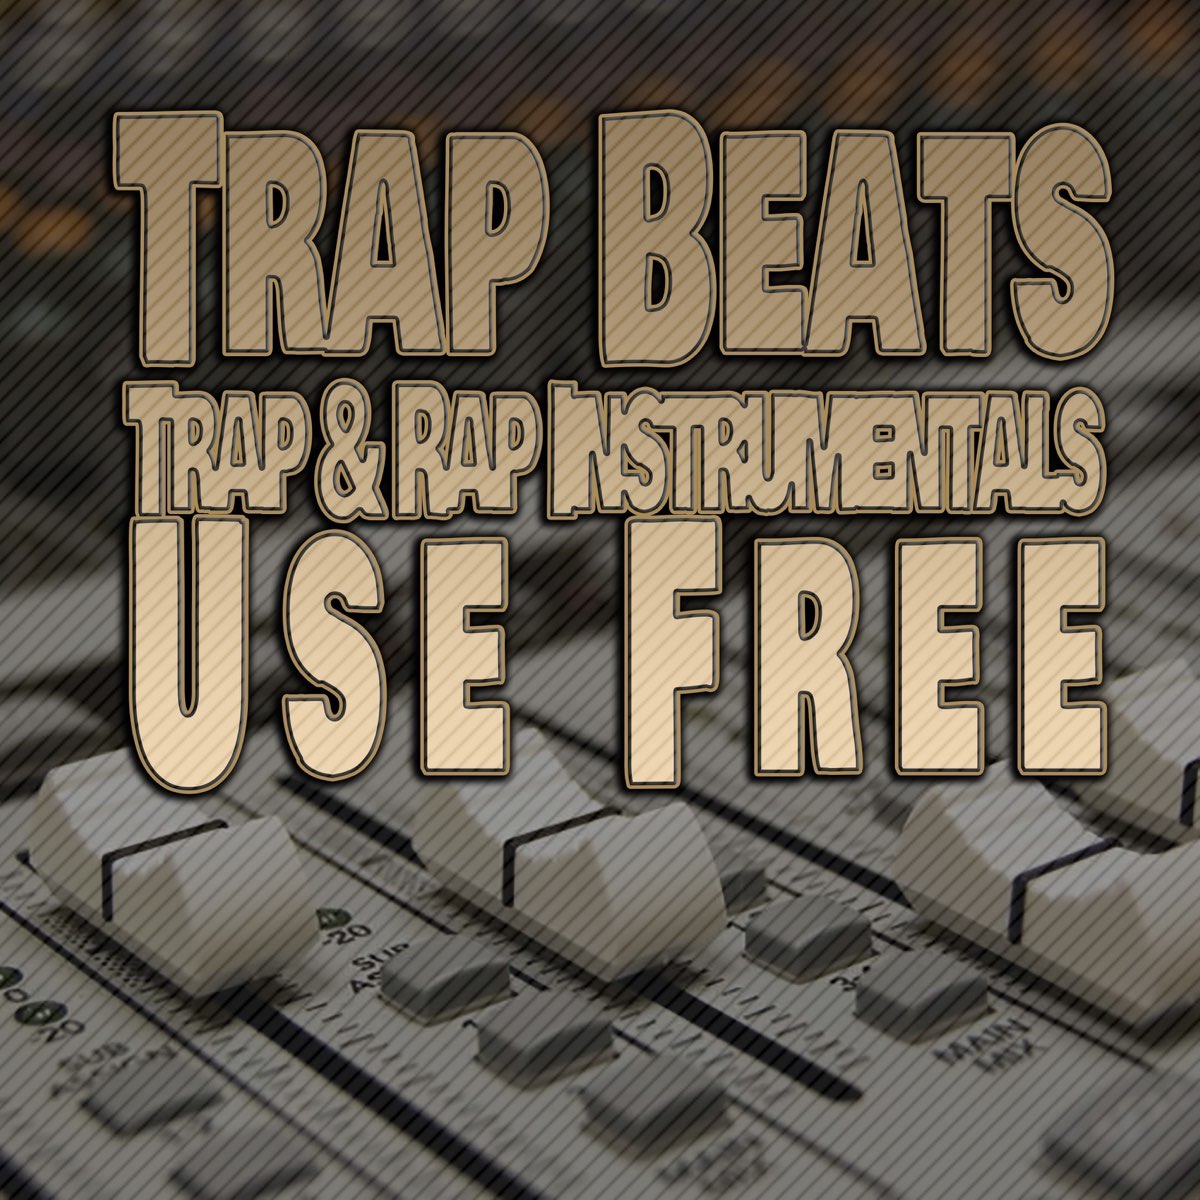 Trap Beats Trap and Rap Instrumentals Use Free - EP by Inhar Beats on Apple  Music